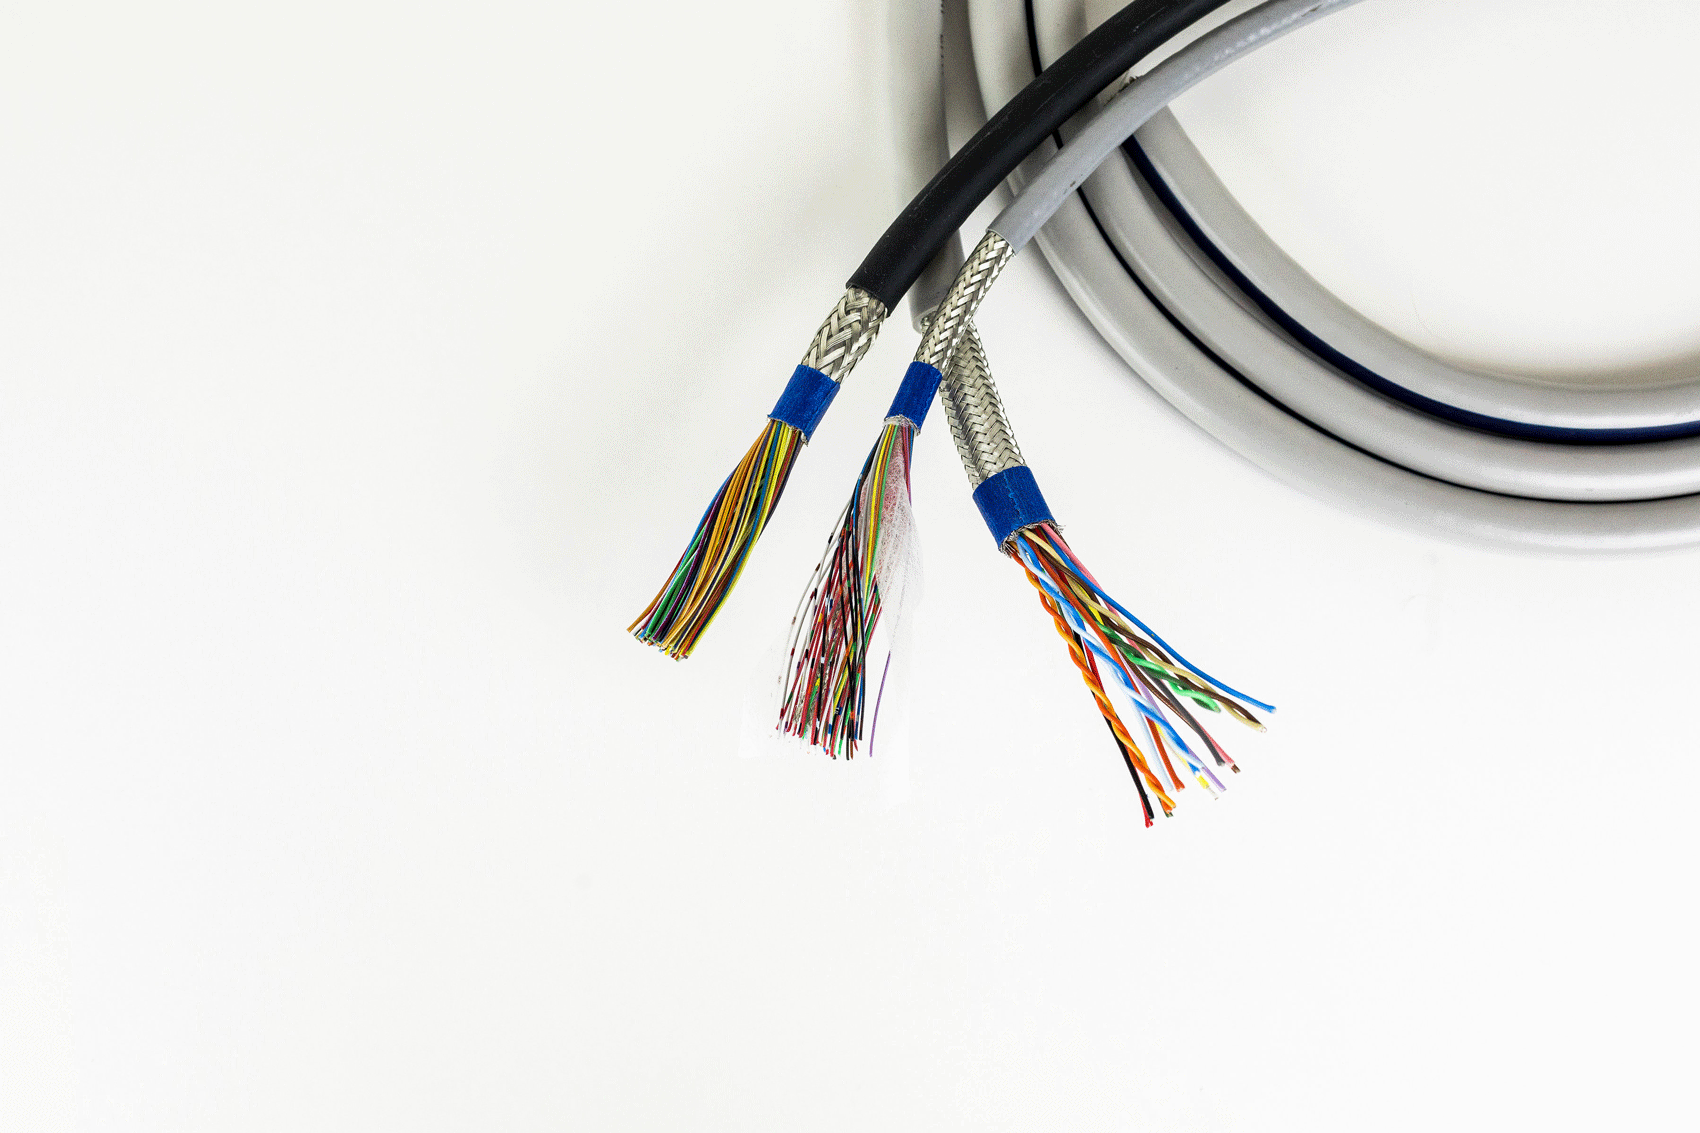 Technical cables